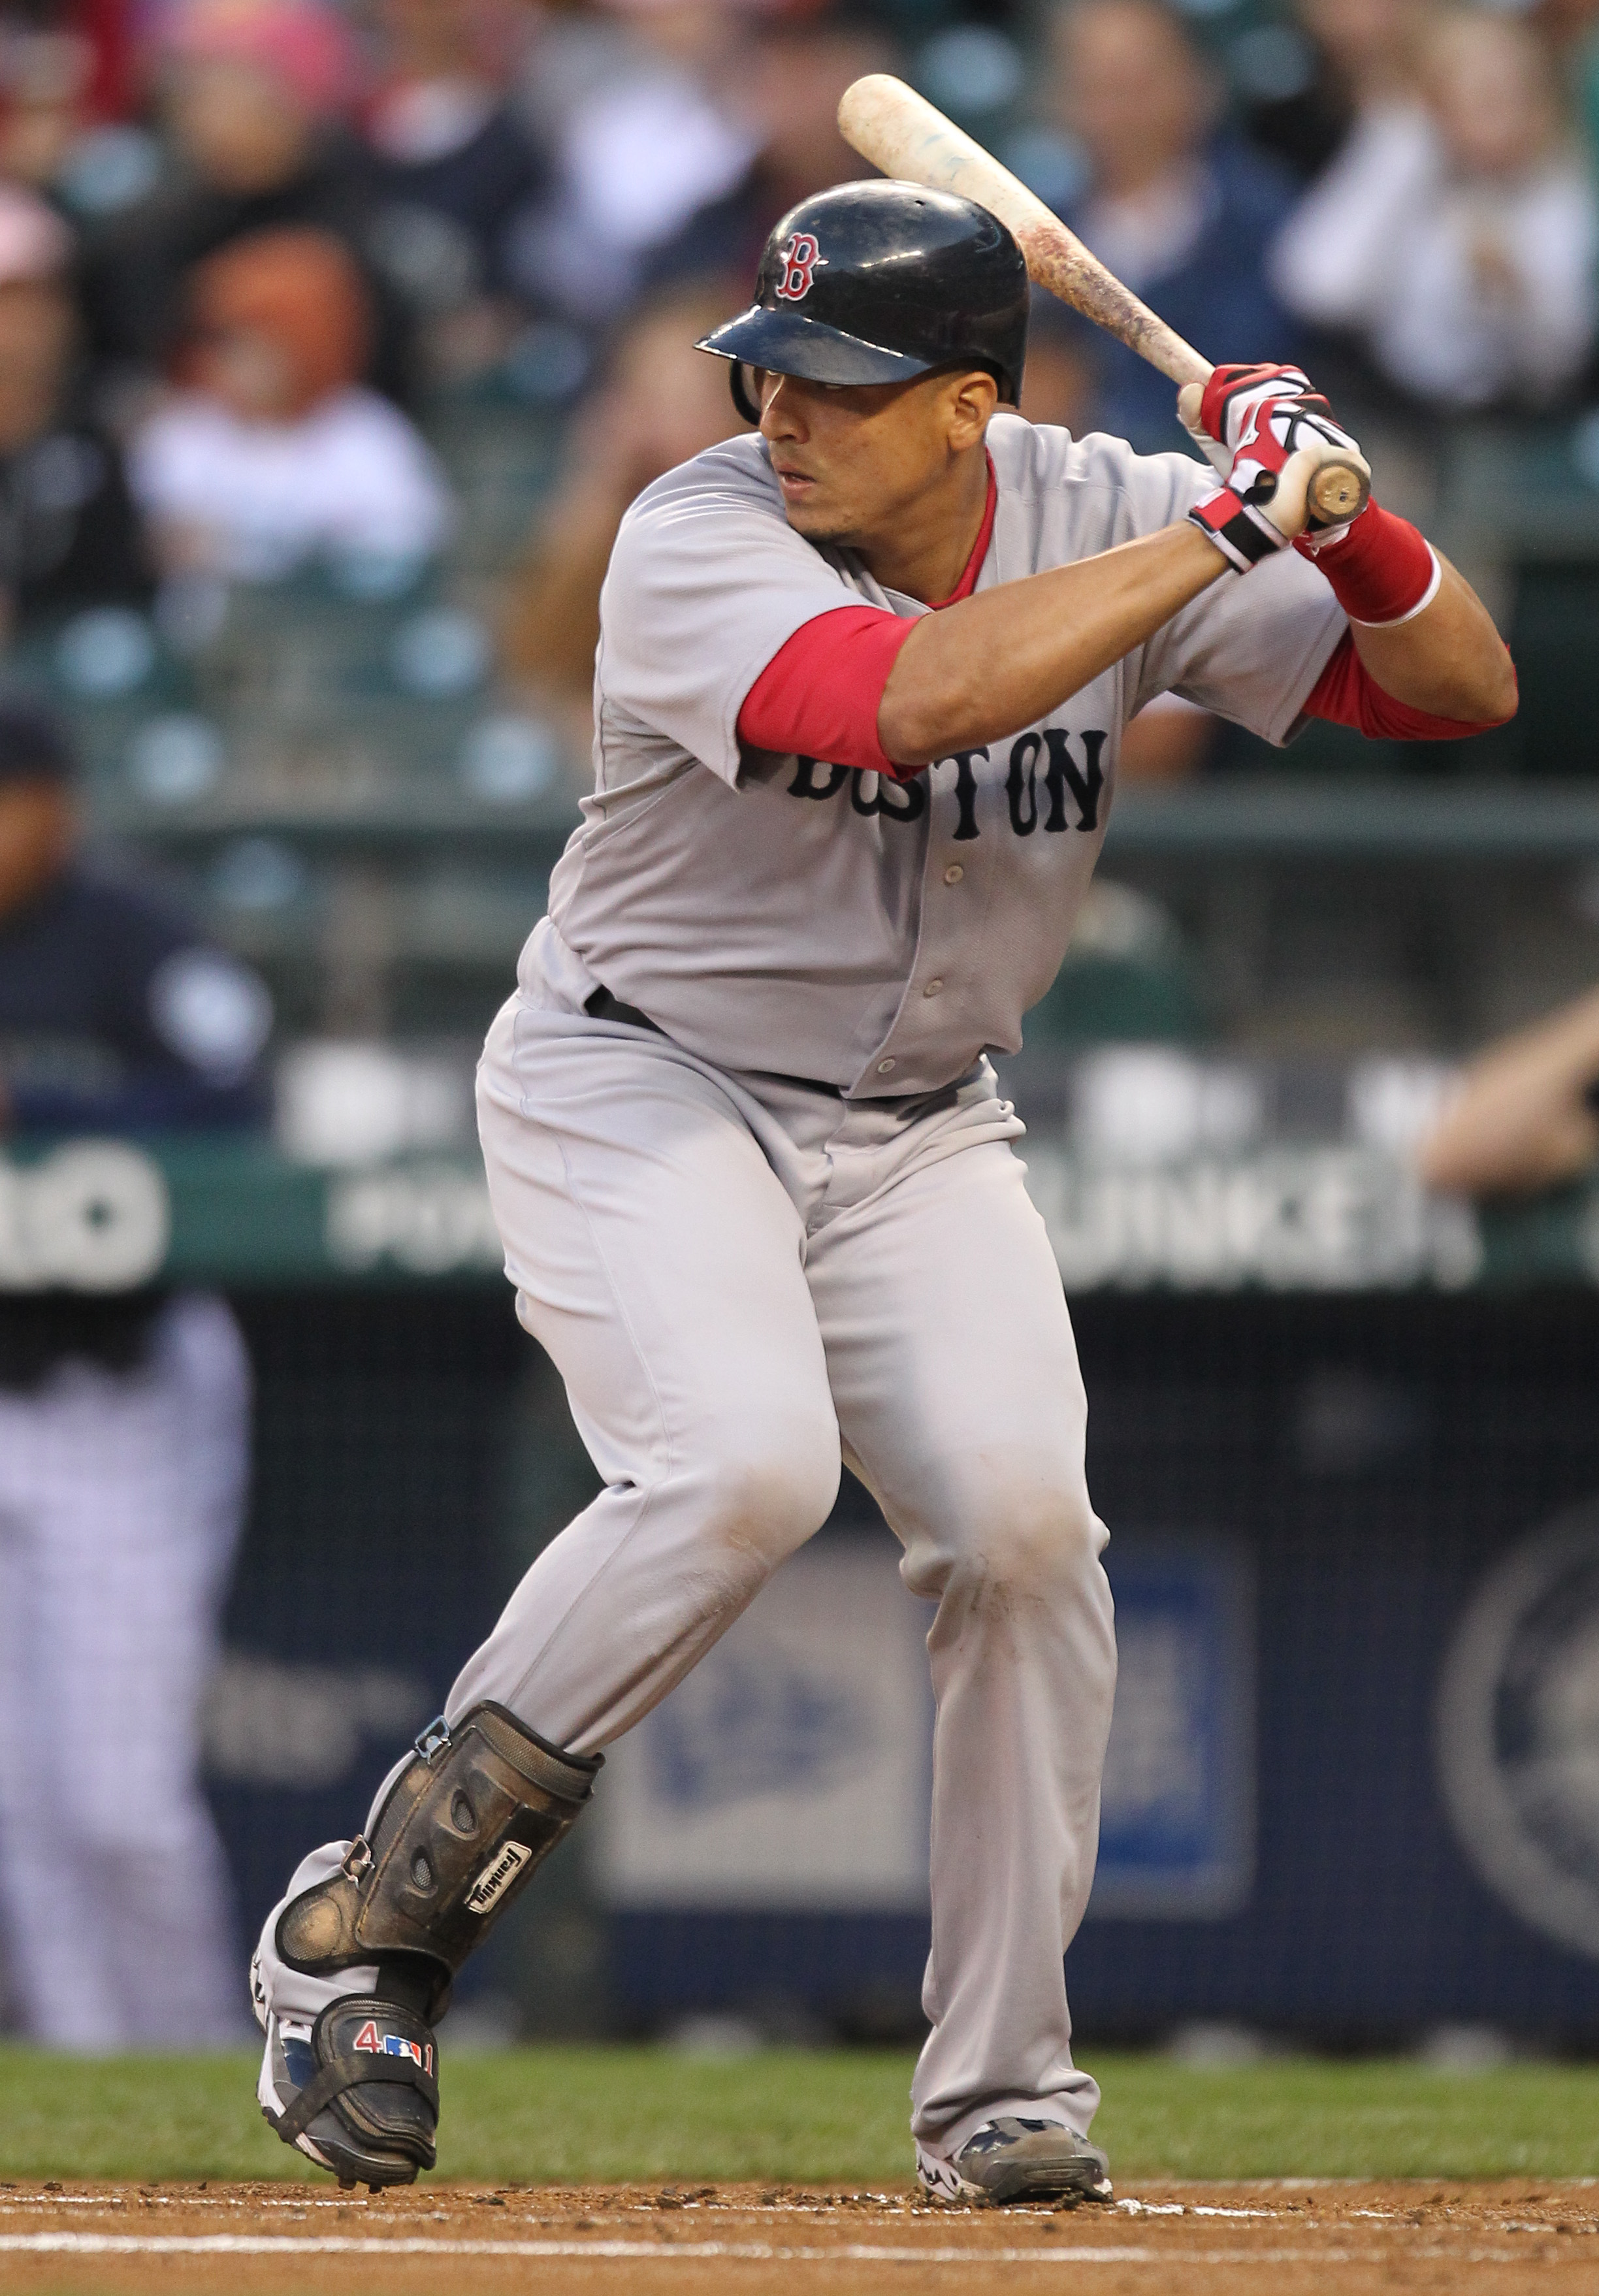 SEATTLE - SEPTEMBER 13:  Victor Martinez #41 of the Boston Red Sox bats against the Seattle Mariners at Safeco Field on September 13, 2010 in Seattle, Washington. (Photo by Otto Greule Jr/Getty Images)